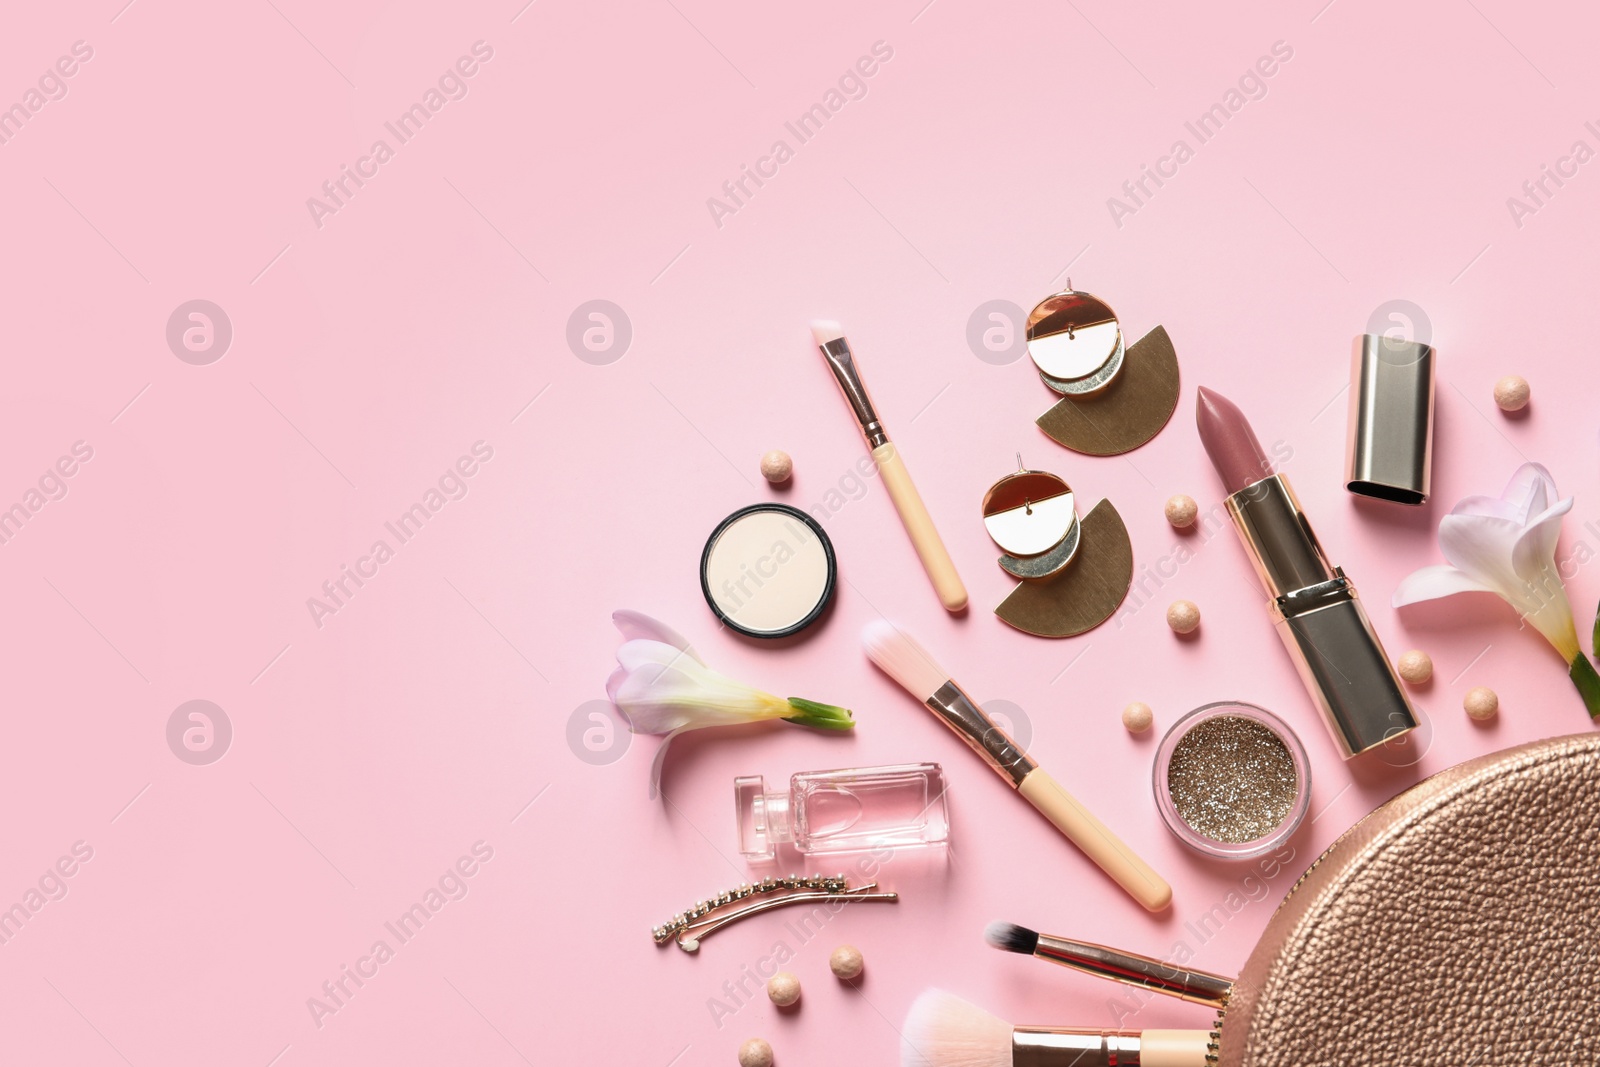 Photo of Makeup products, flowers and cosmetic bag on color background, flat lay with space for text